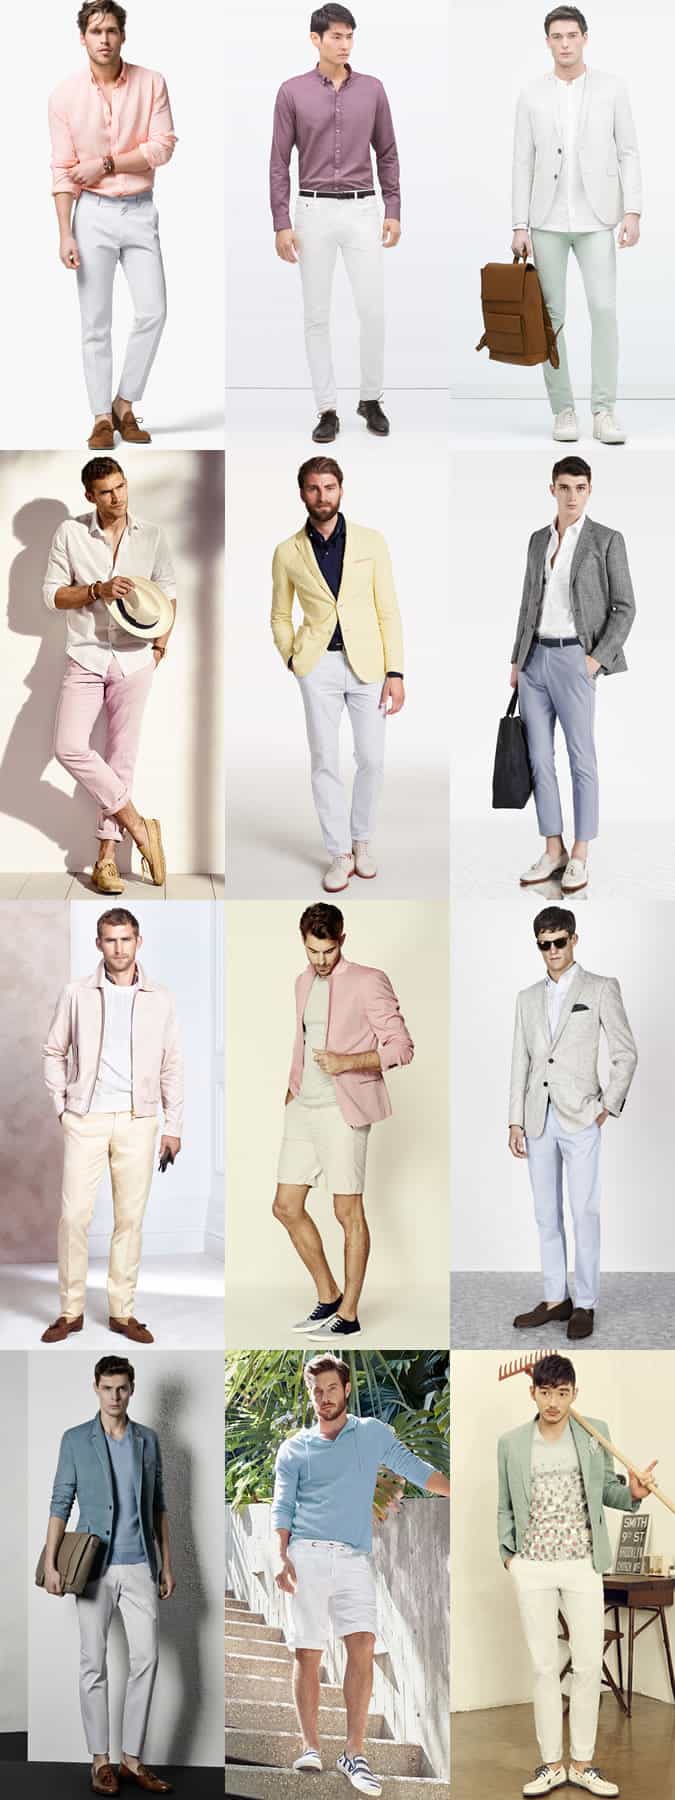 Men's White and Pastel Shades Outfit Inspiration Lookbook